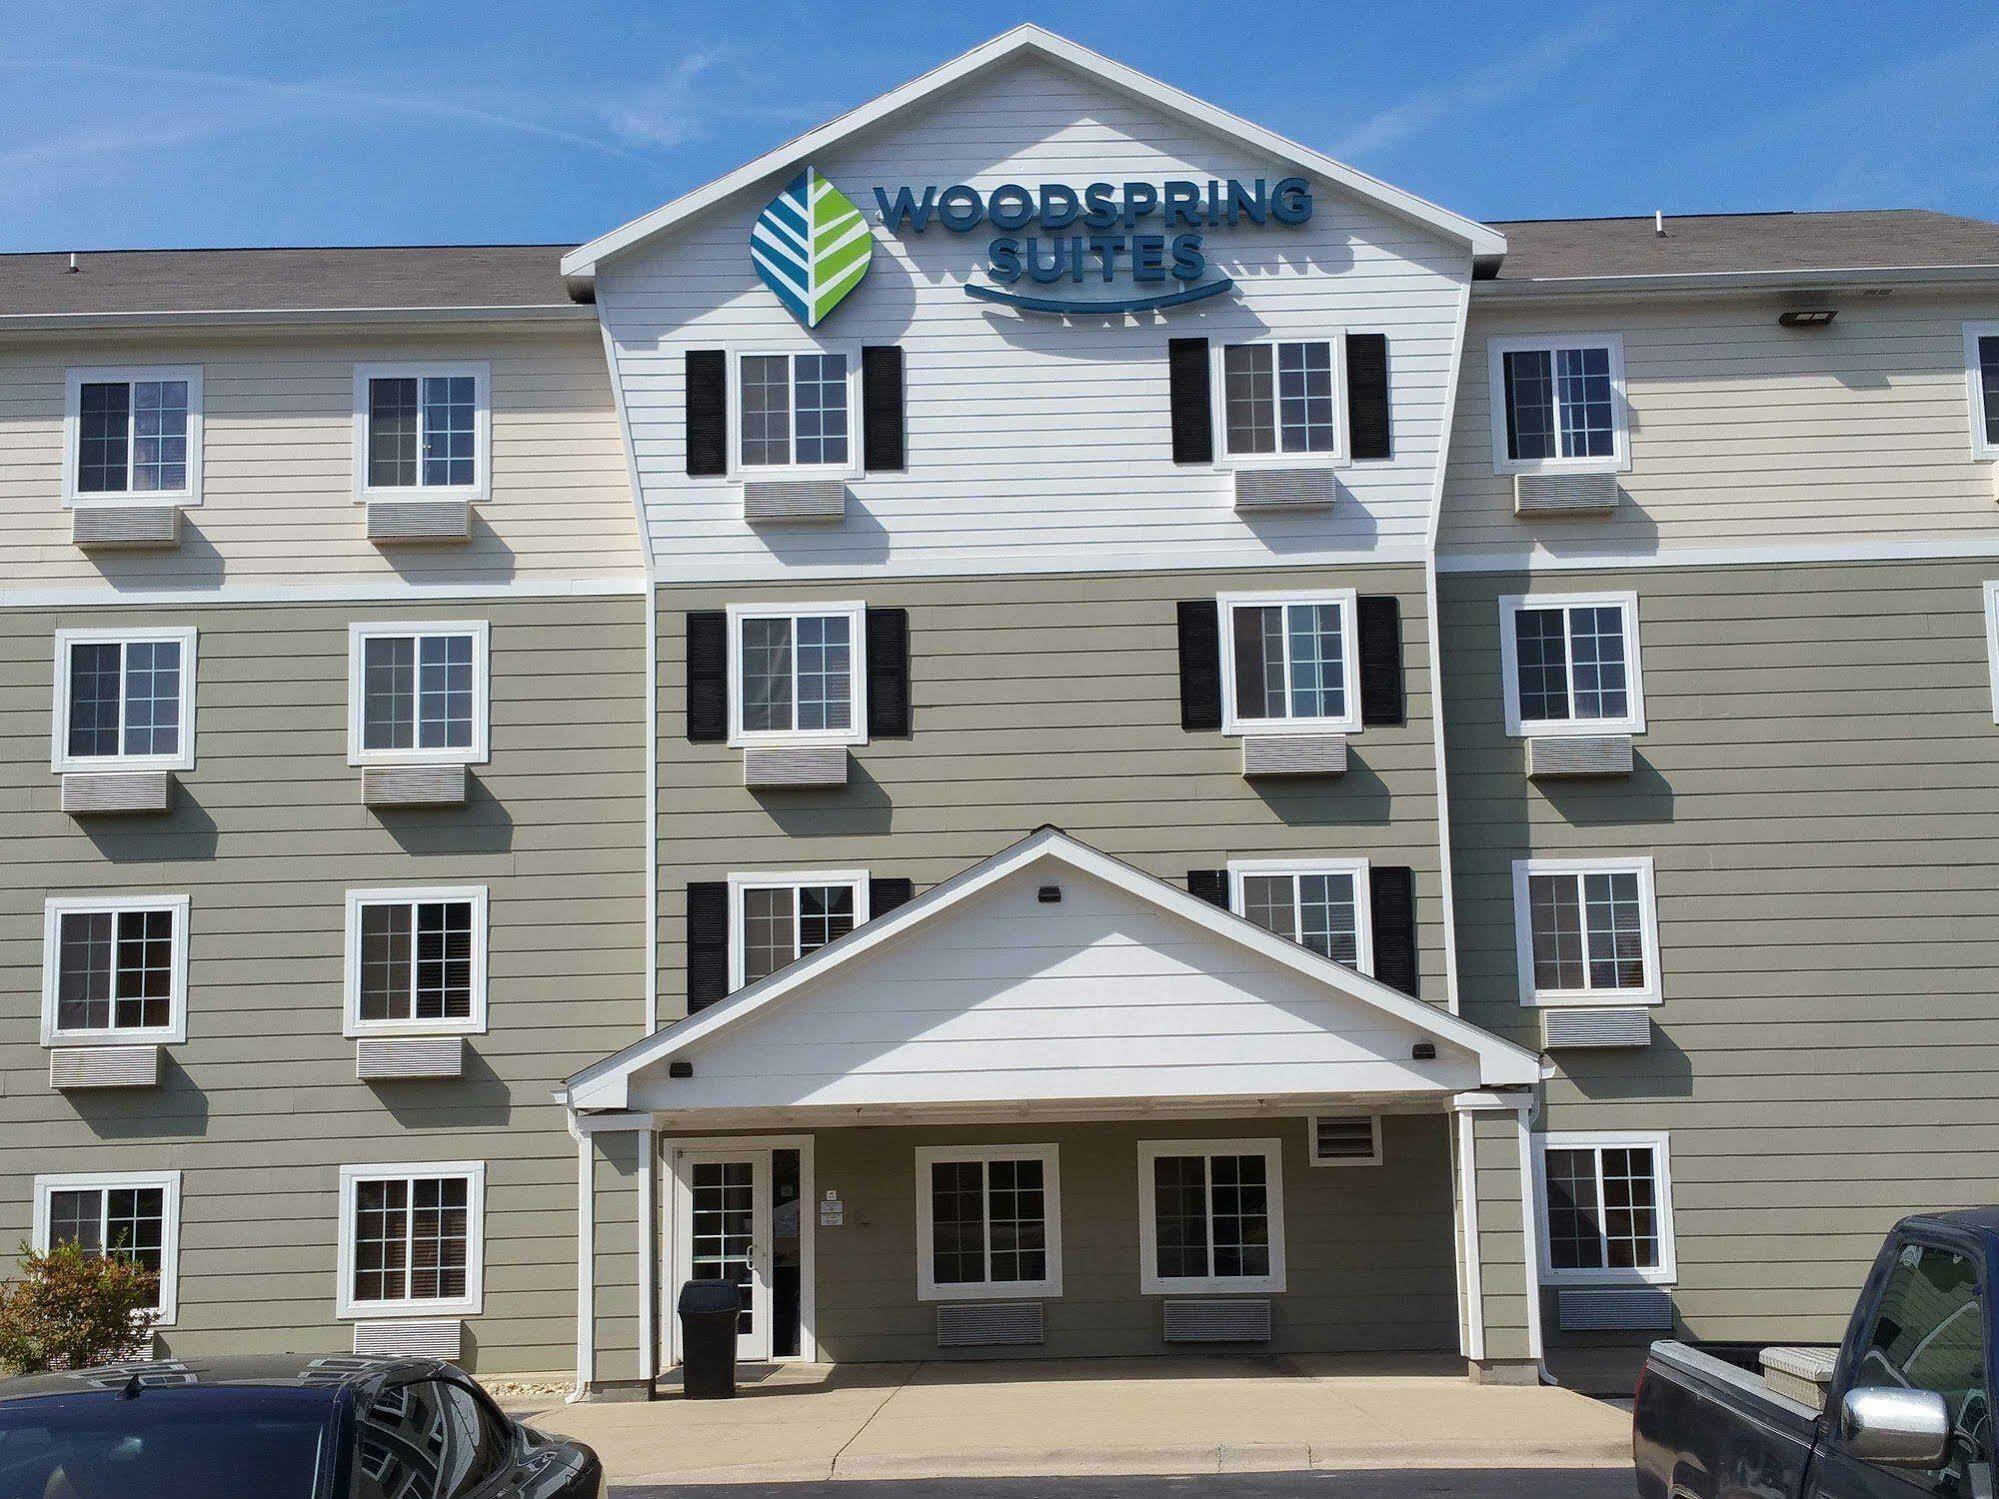 Woodspring Suites Louisville Southeast Forest Hills 外观 照片